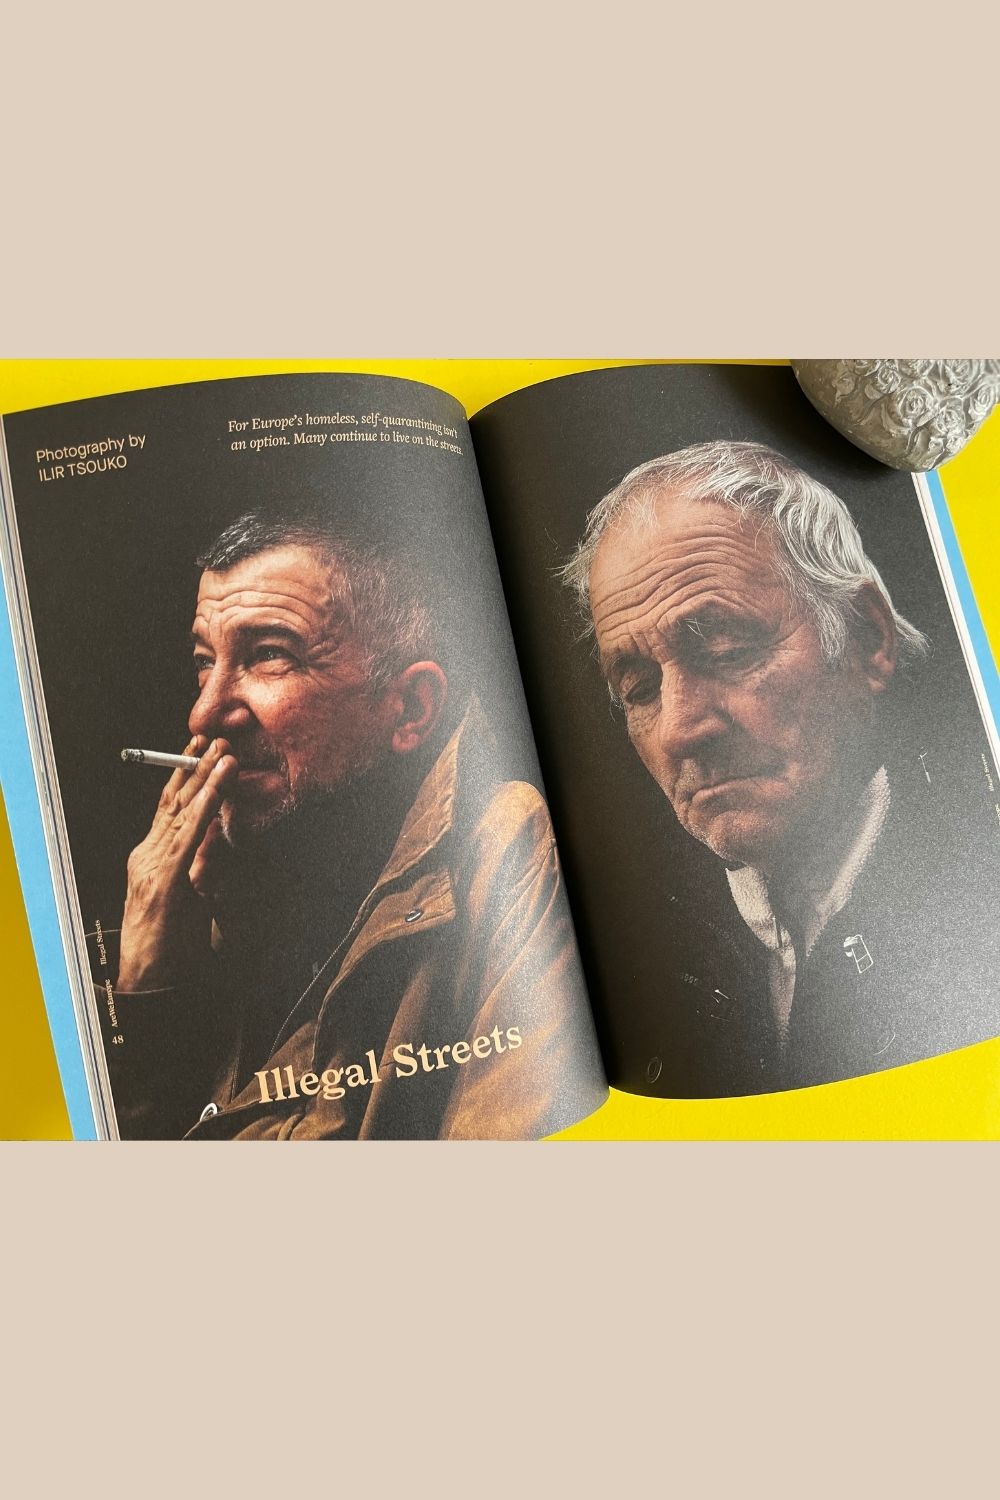 Inside Issue 7 of Are We Europe. Photographs of the homeless in the pandemic